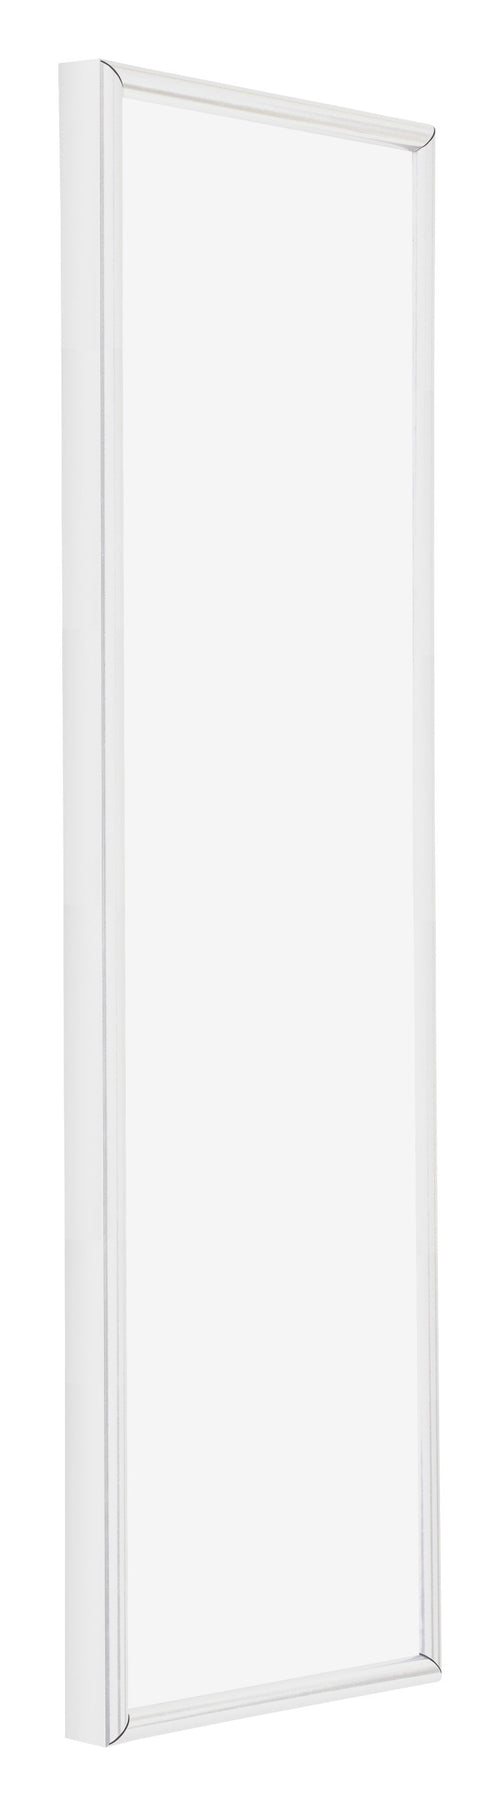 Annecy Plastic Photo Frame 25x75cm White High Gloss Front Oblique | Yourdecoration.co.uk